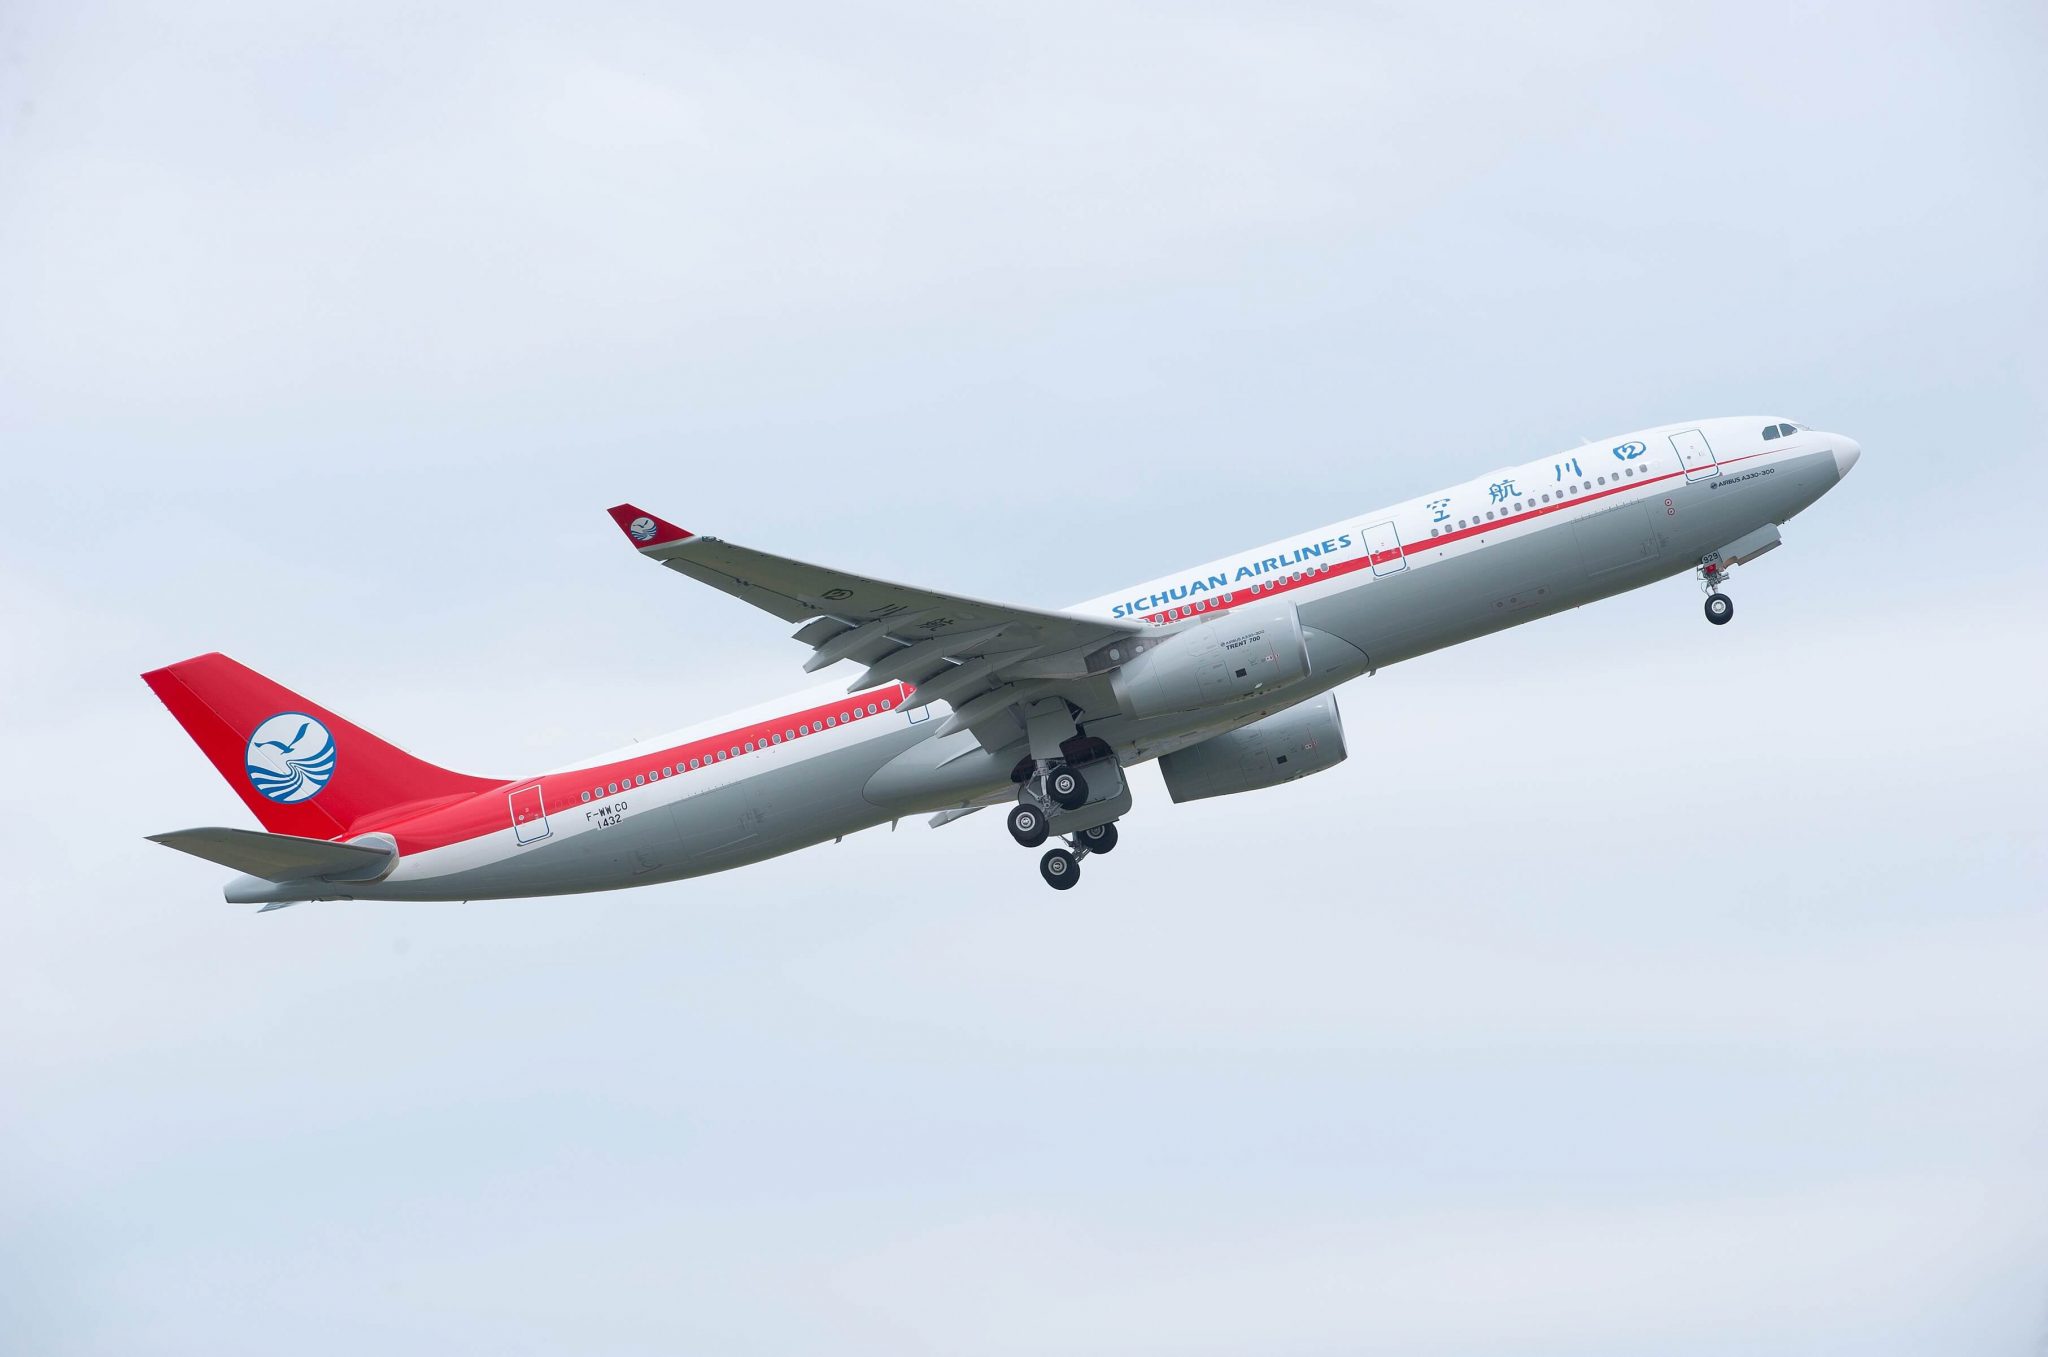 Sichuan Airlines launches flights from Pulkovo St. Petersburg Airport